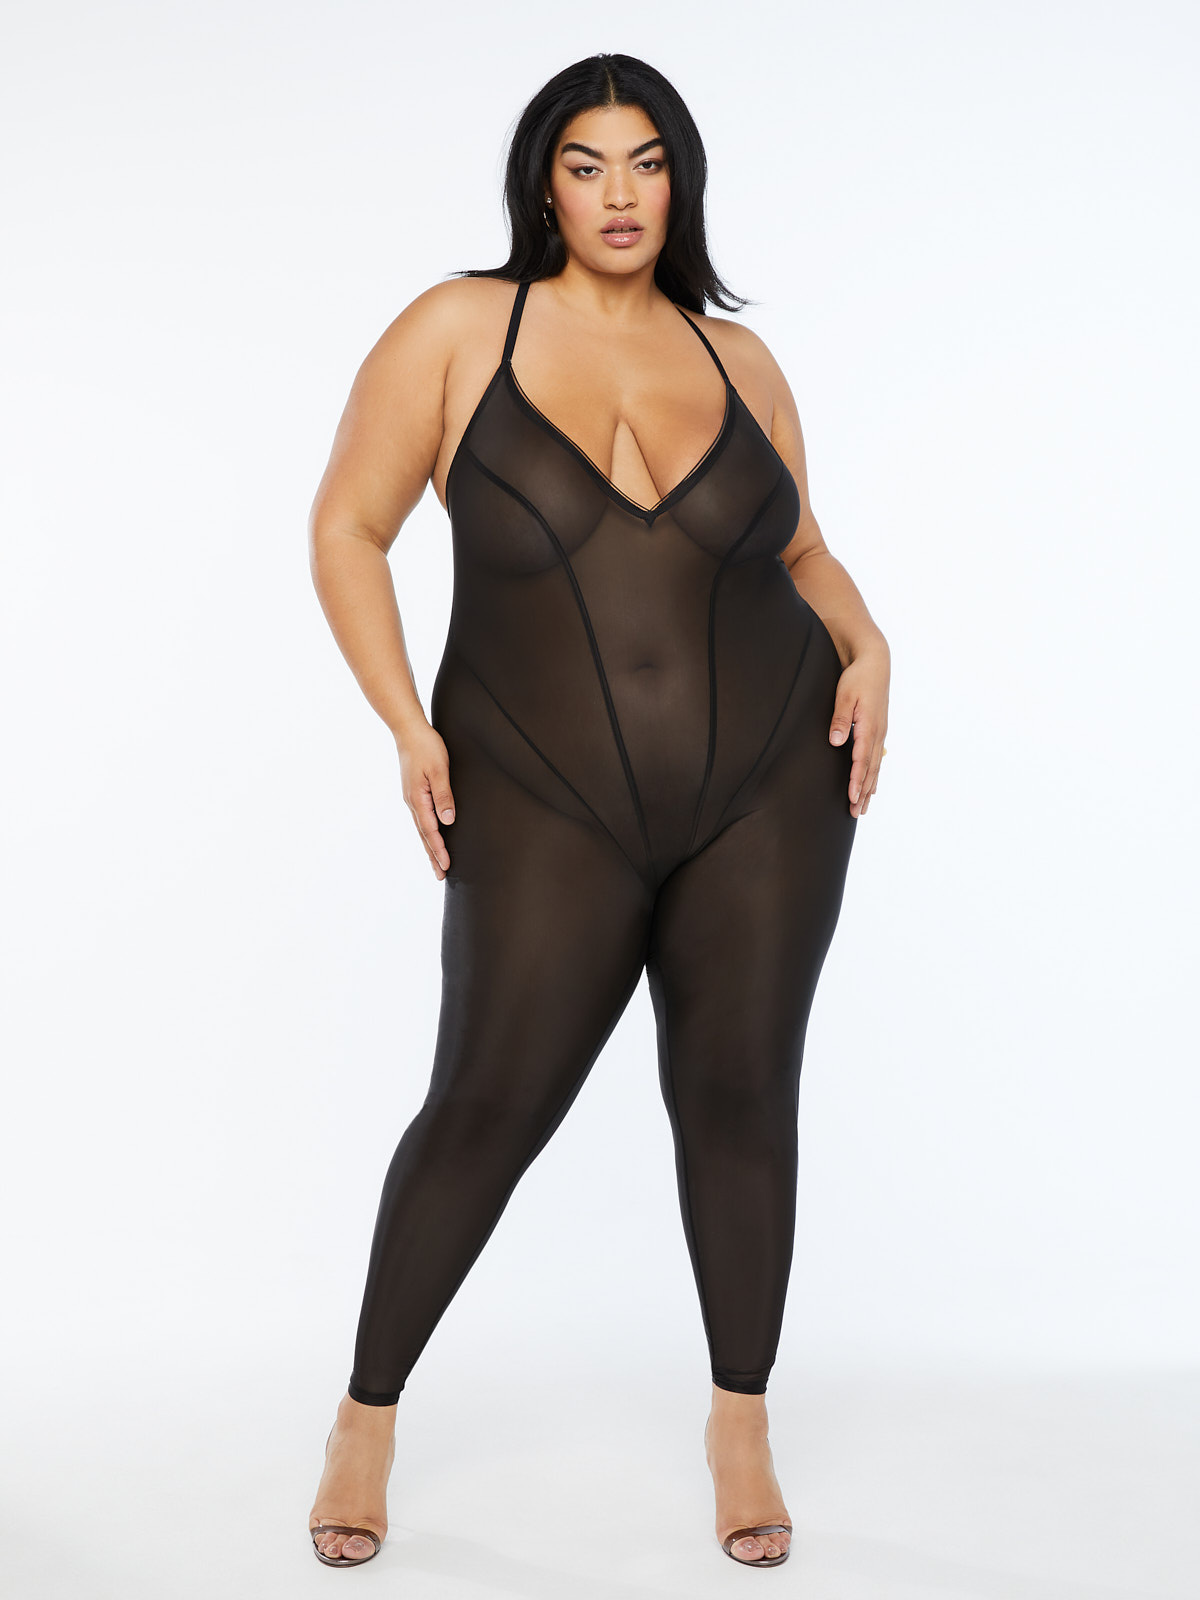 X-Ray Vision Crotchless Catsuit